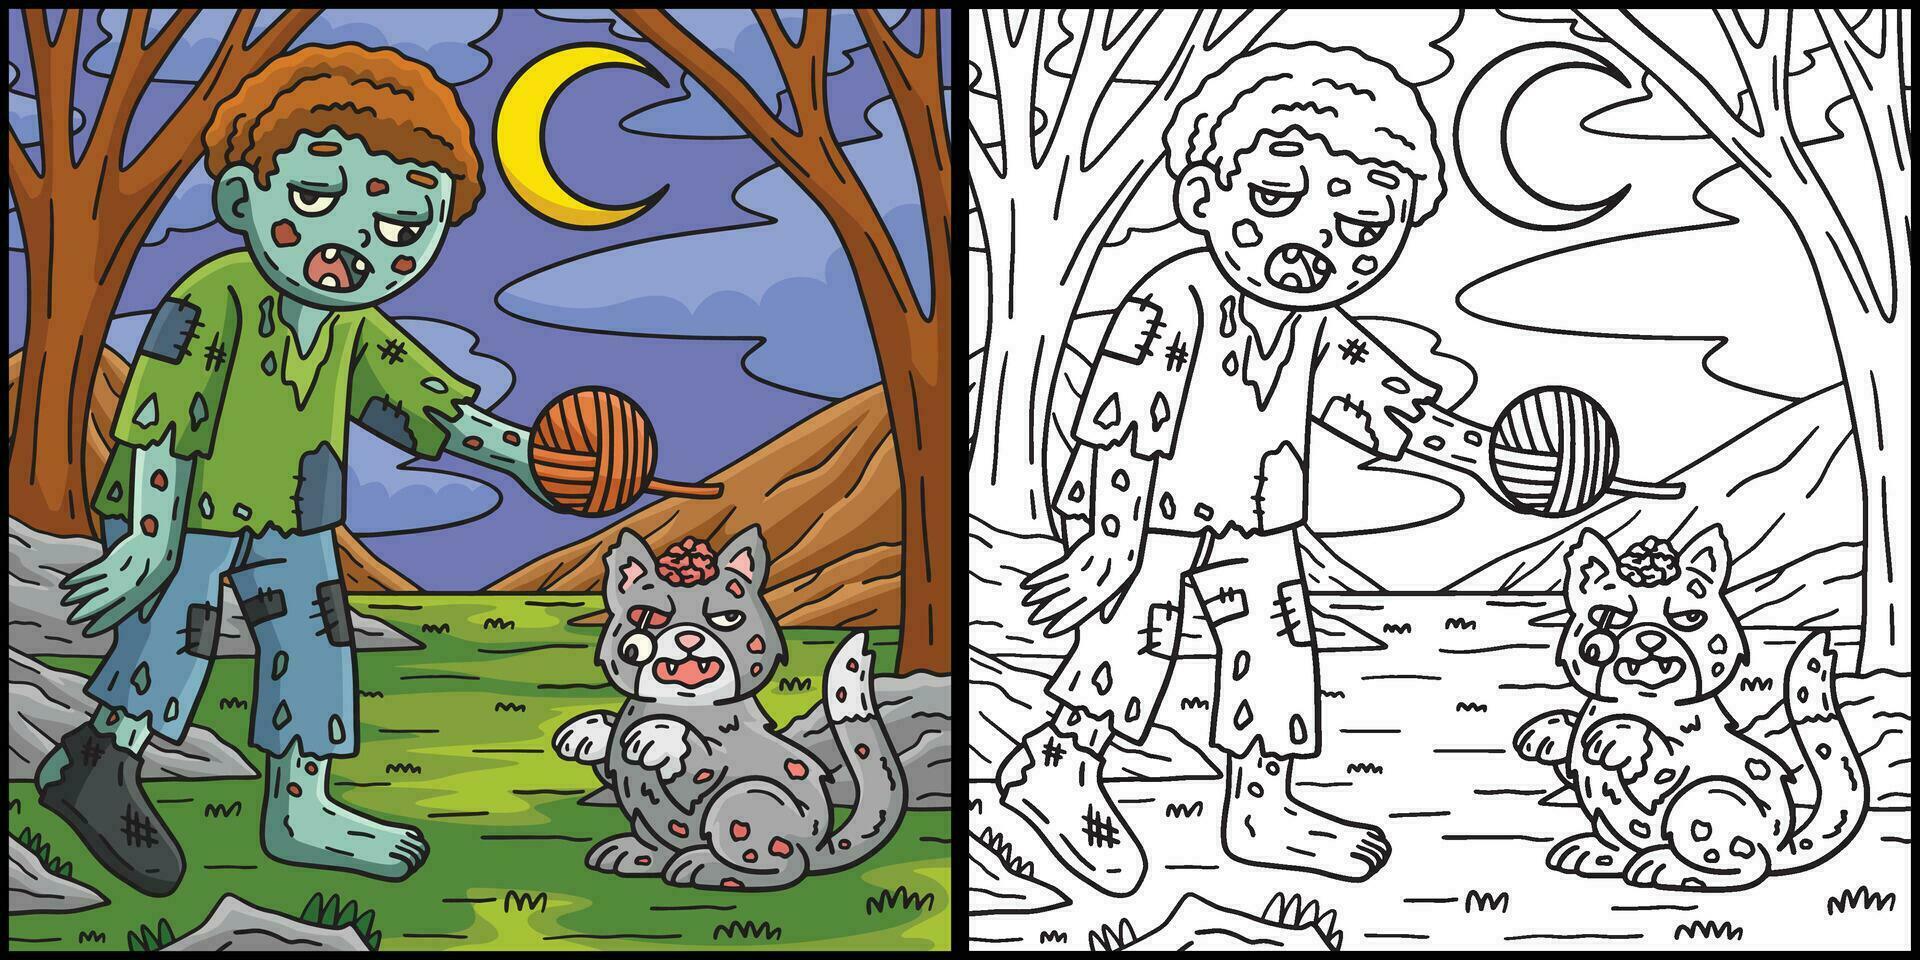 Zombie and Undead Cat Coloring Page Illustration vector